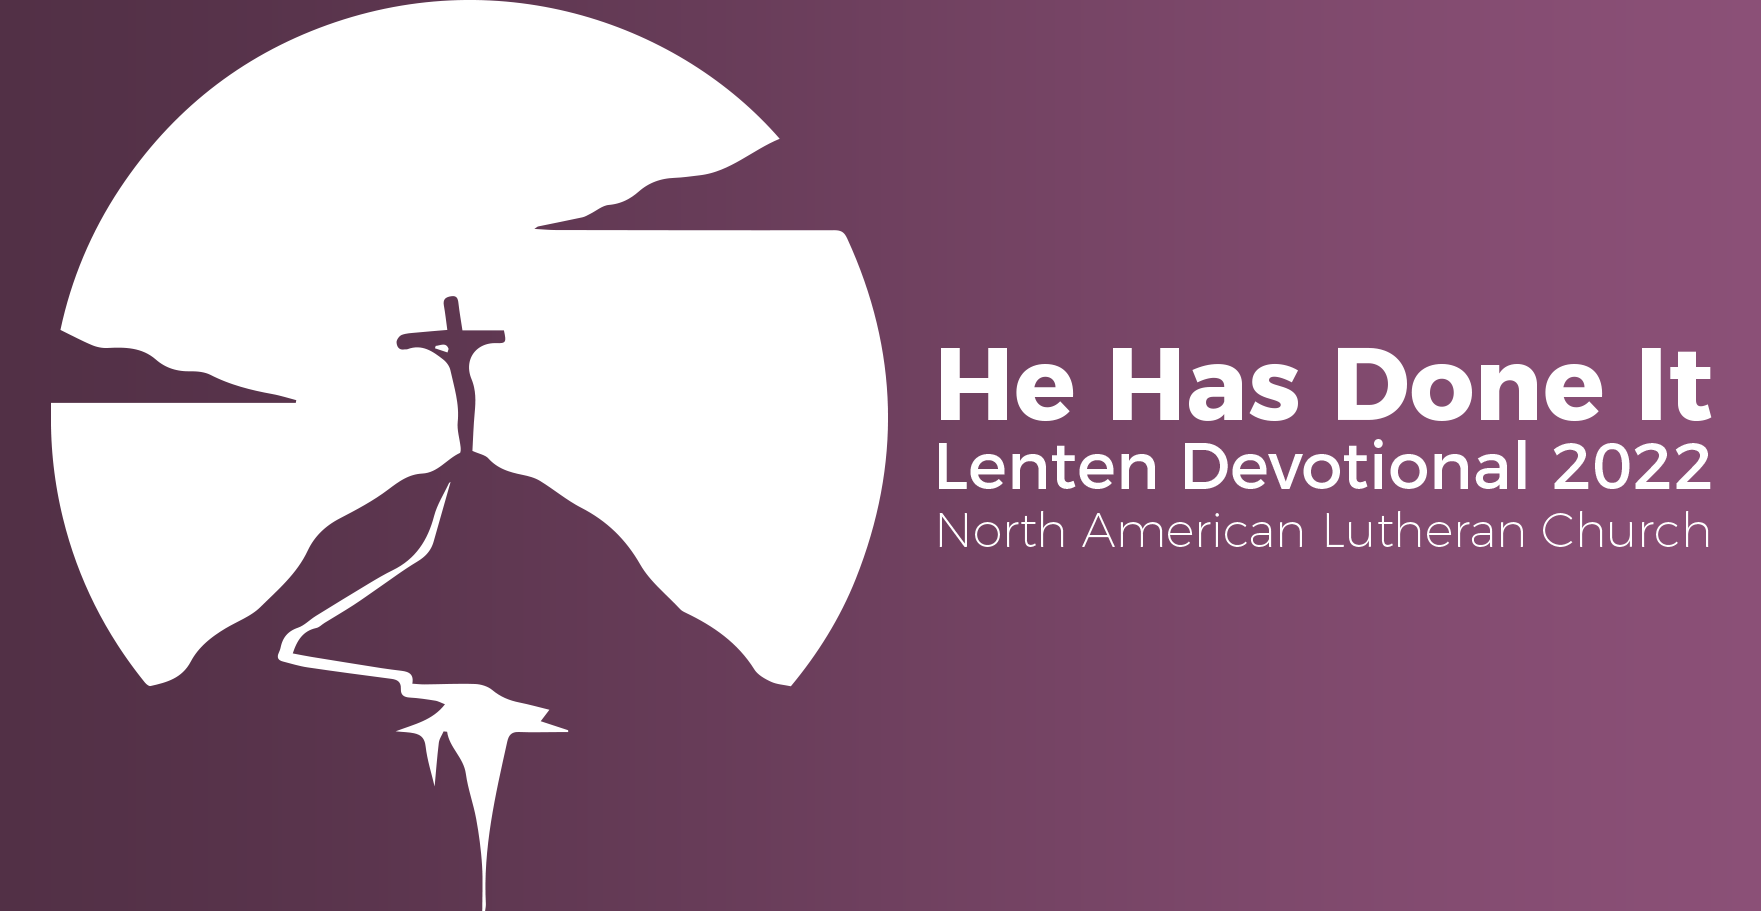 March 21, 2022 | Monday of the Week of Lent III